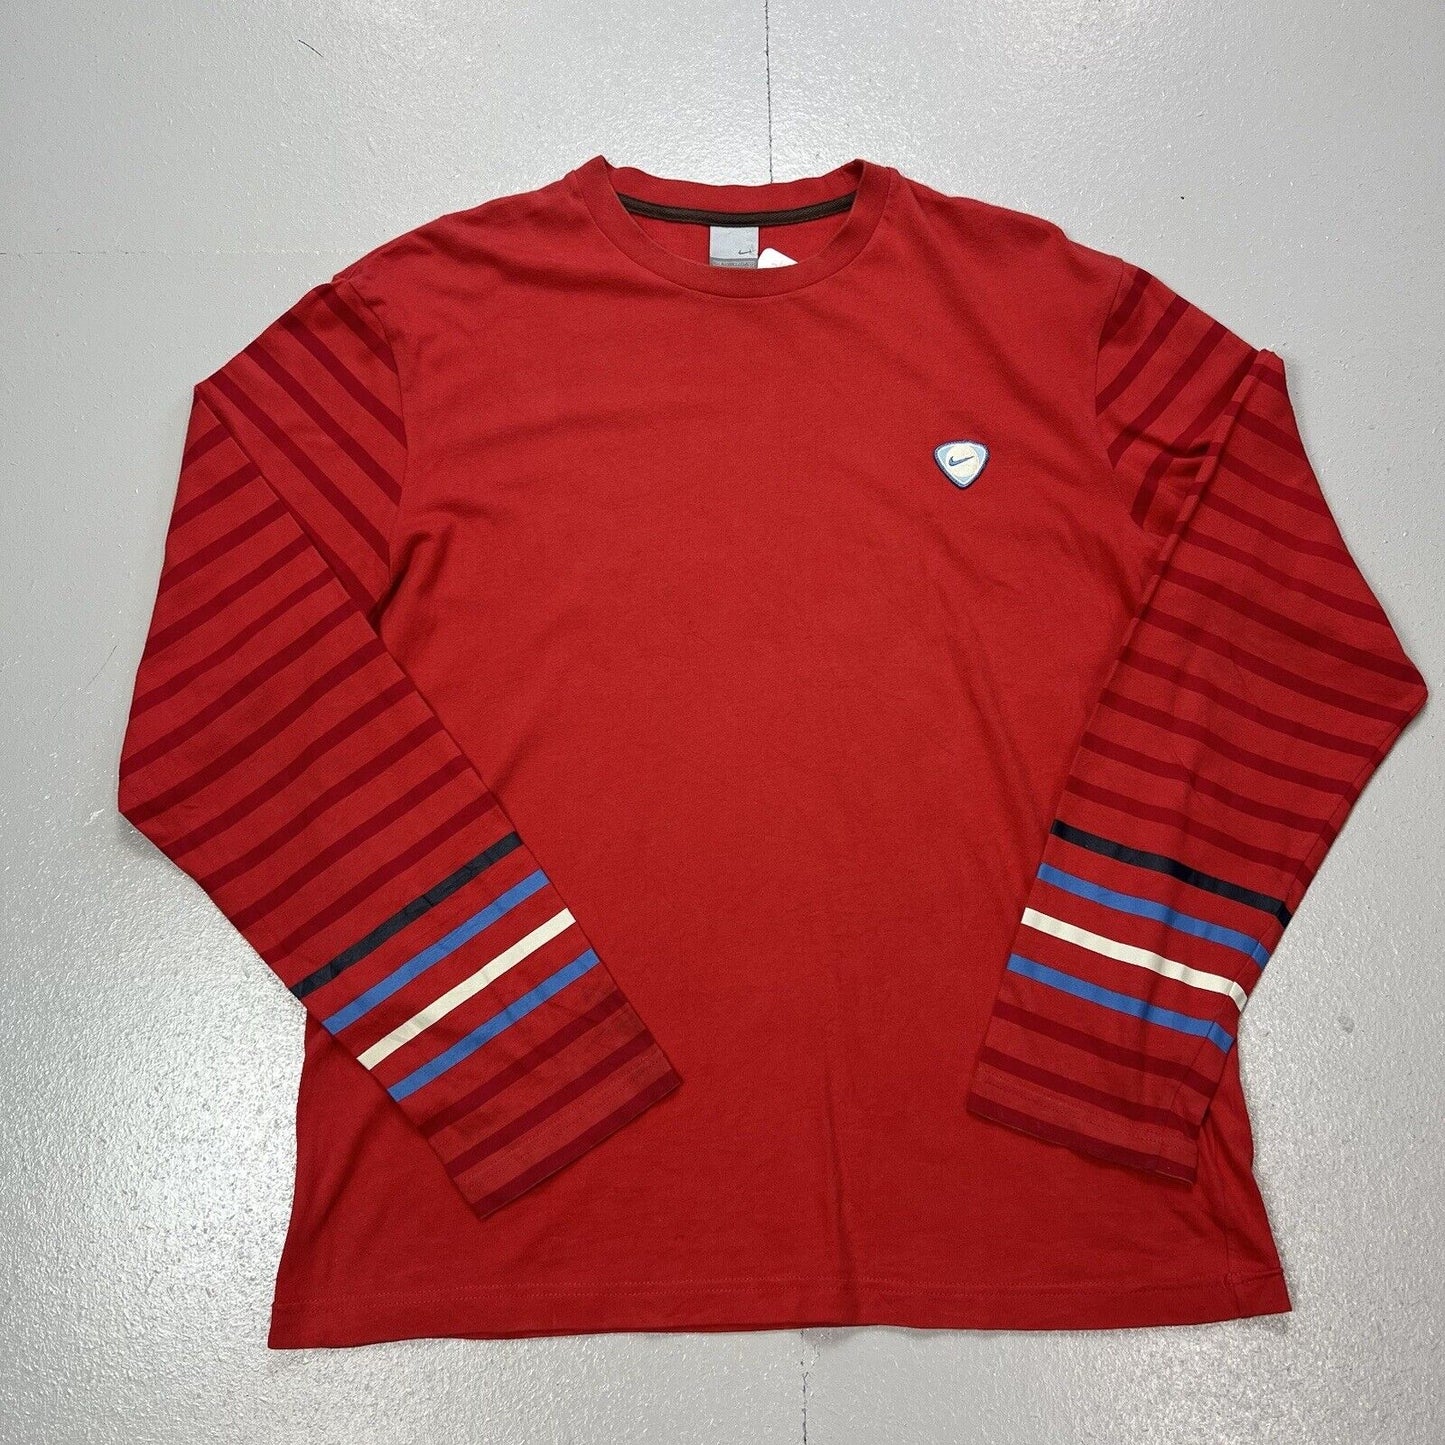 Nike T-Shirt Athletic Cut Graphic Print Long Sleeve Y2K Red Mens Large